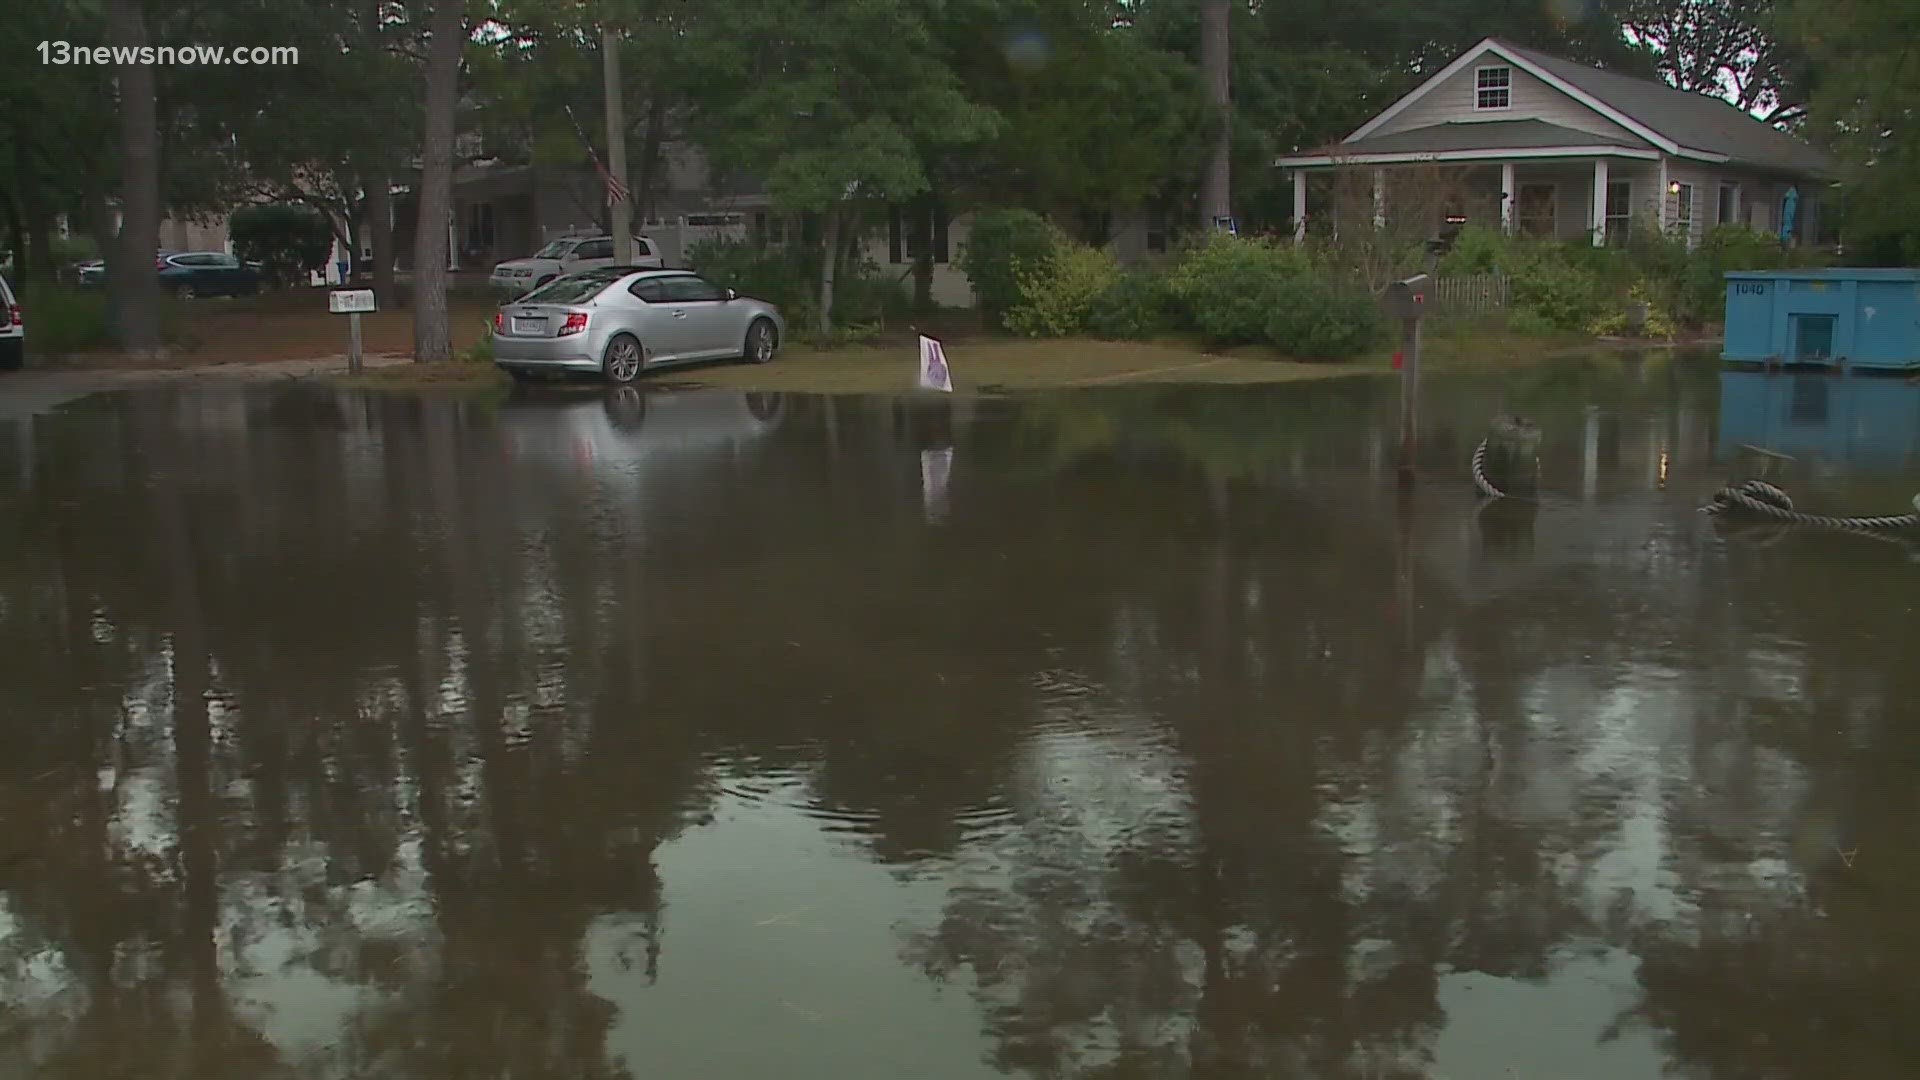 With climate change top of mind for many, the City of Hampton is finding ways to become more resilient and better support residents in times of crisis.